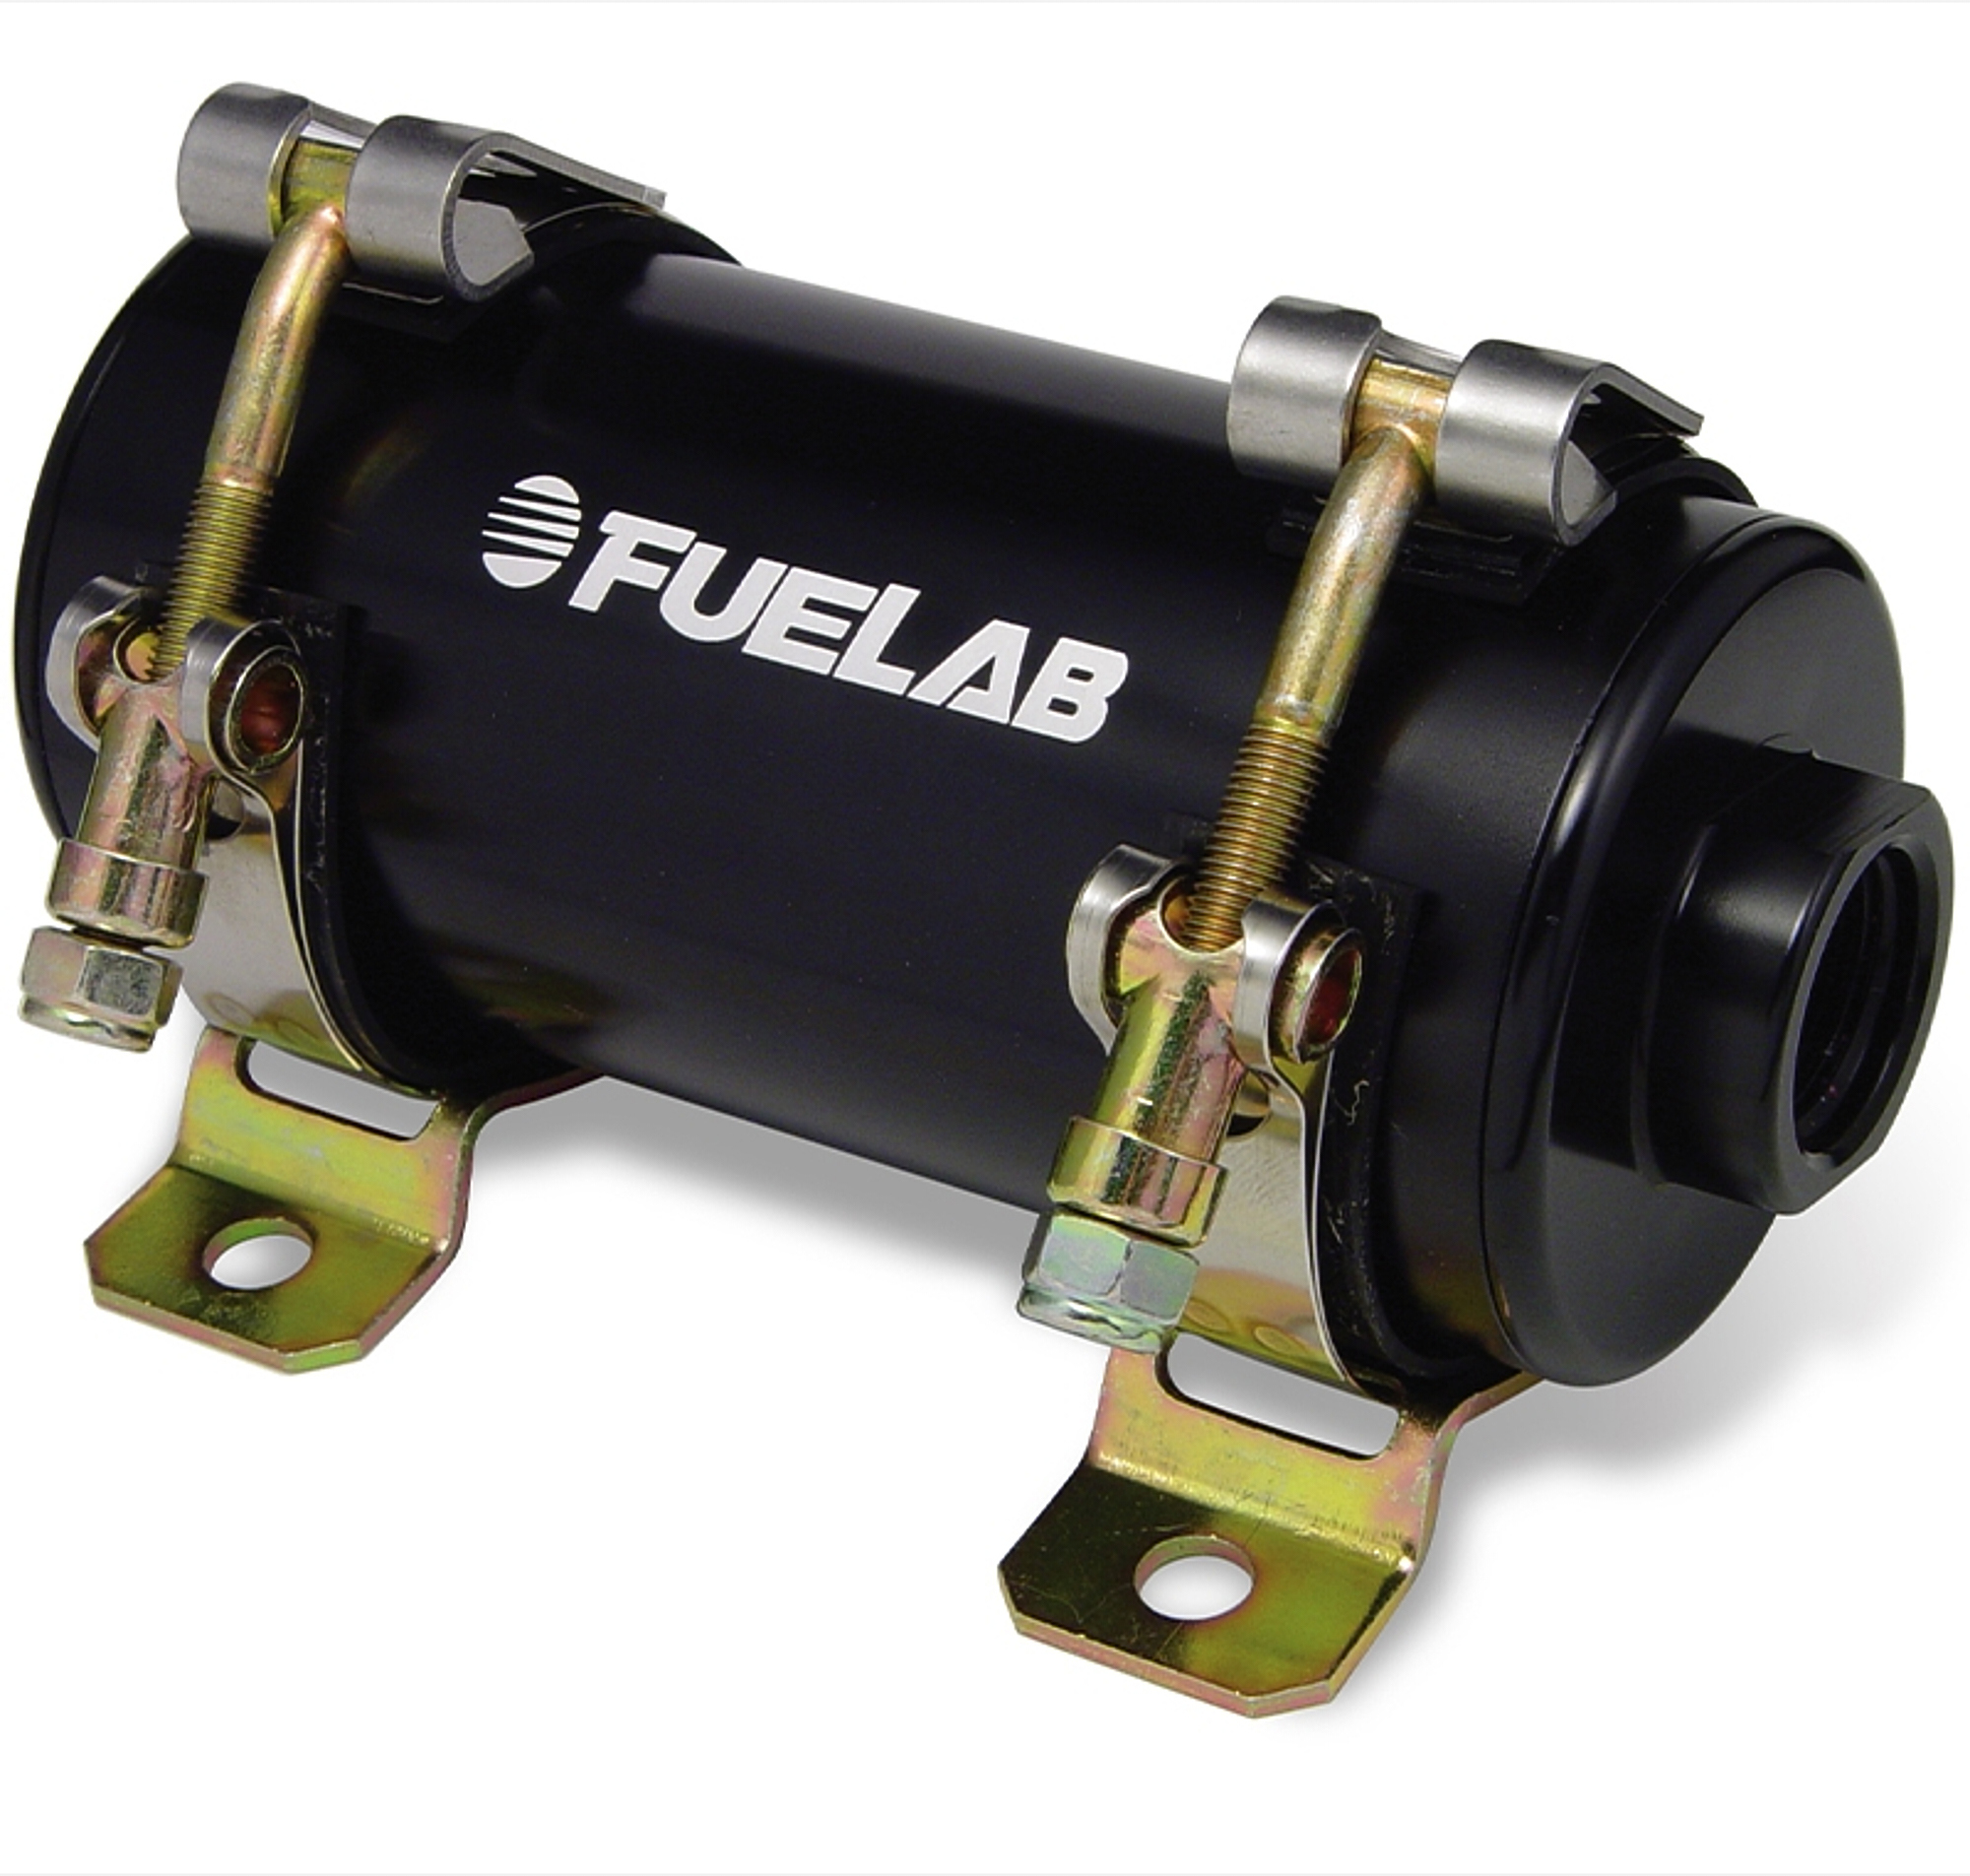 FueLab 42401-1 Fuel Pump, Electric, Inline, Brushless, 170 gph, 10 AN Female Inlet / 10 AN Female Outlet, Gas / Diesel / E85 / Methanol, Mounting Hardware Included, Aluminum, Black Anodized, Each